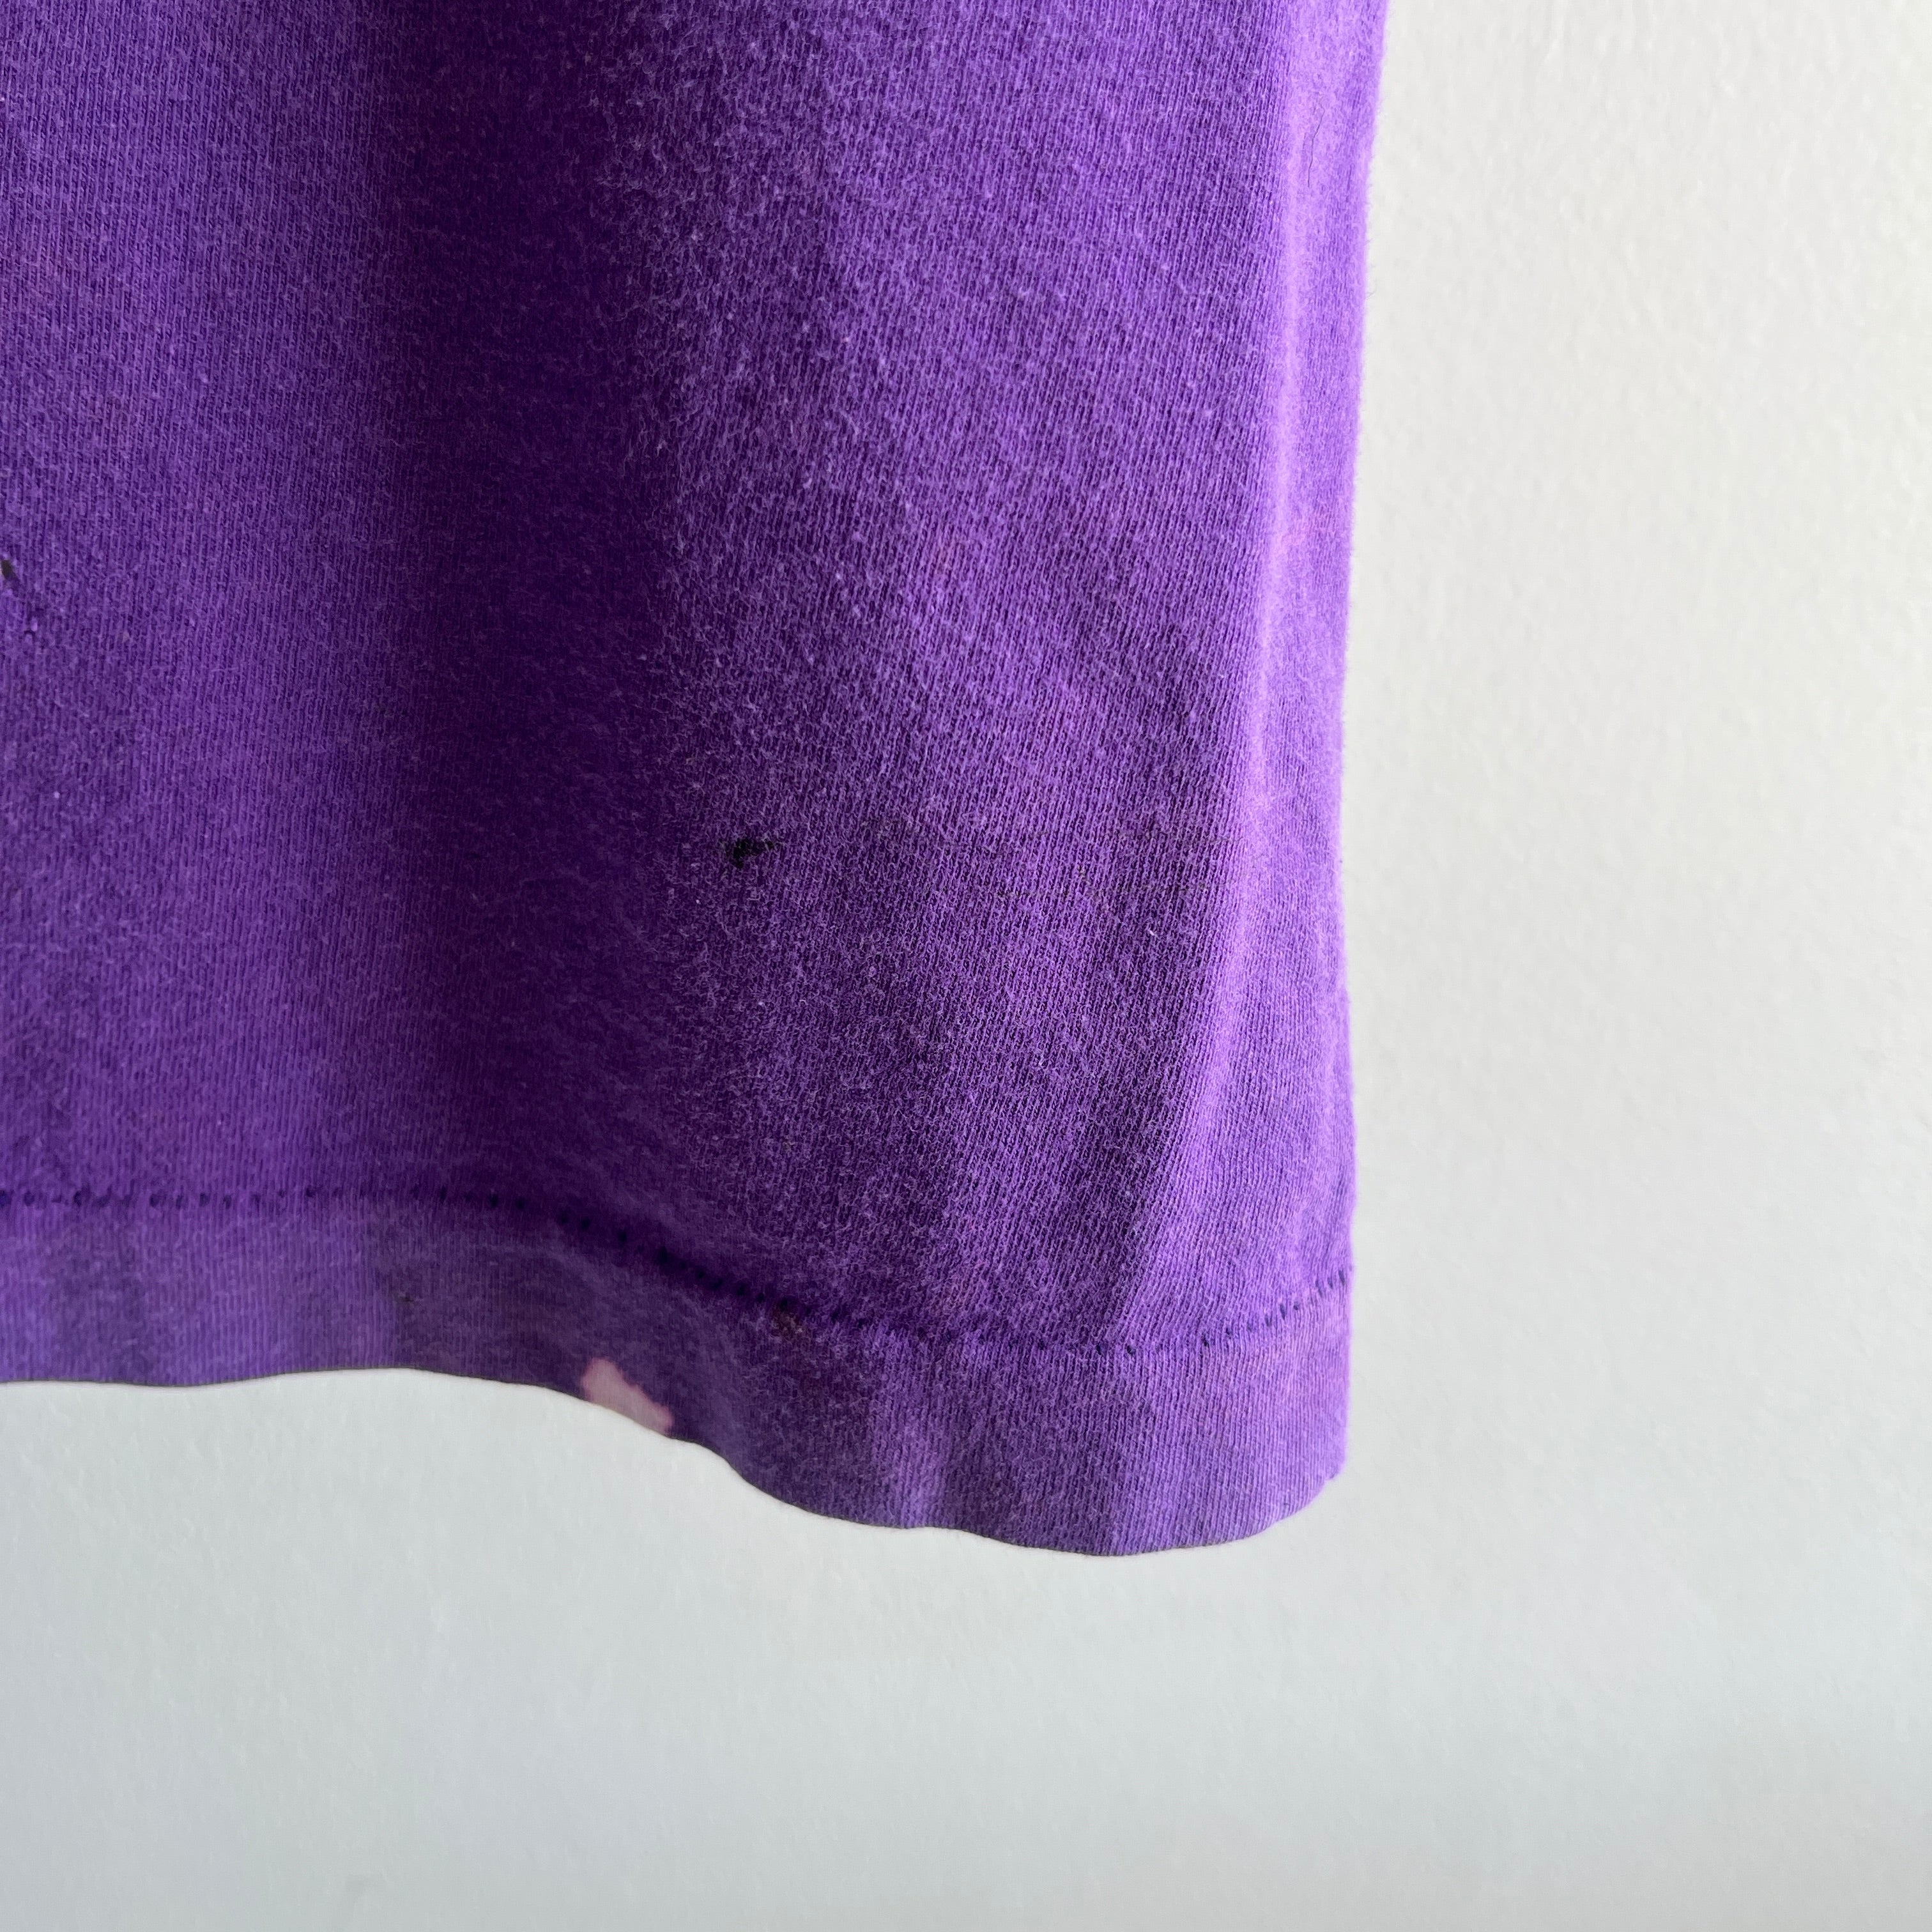 1980s Perfectly Purple Cotton Worn and Stained Tank Top